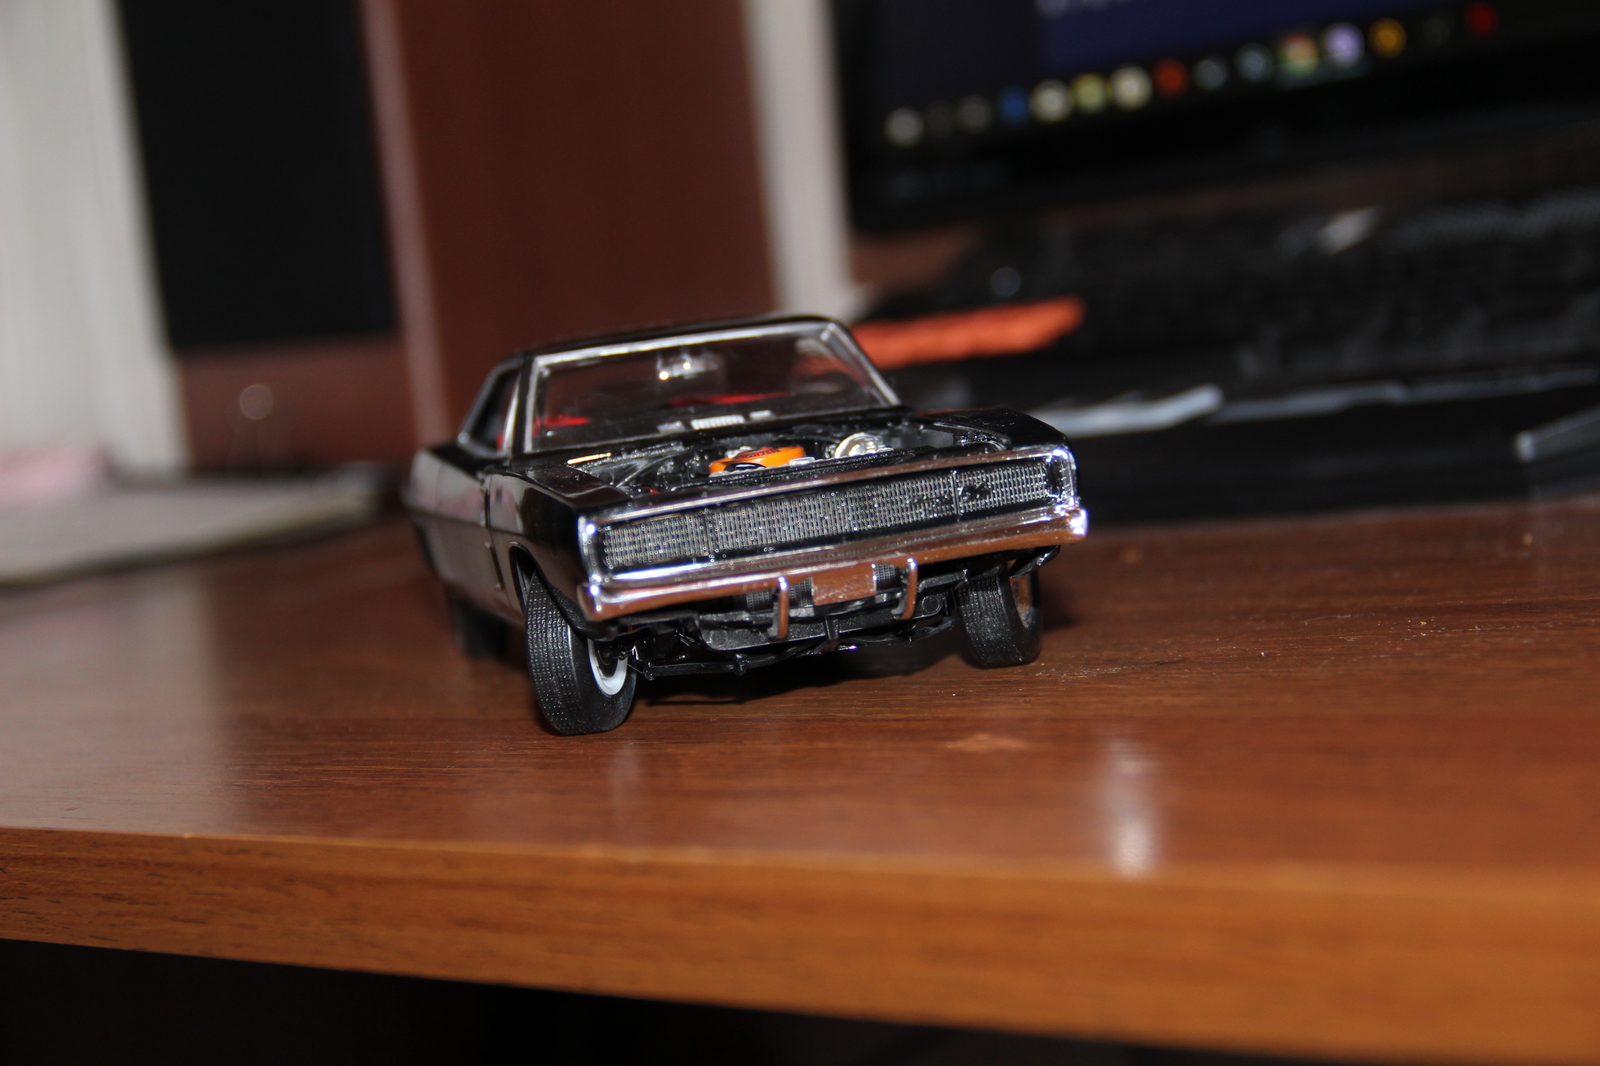 Our hands are not for boredom, or how to collect a dream in 2 months. - My, Longpost, Modeling, Revell, Scale model, Dodge charger, Muscle car, Prefabricated model